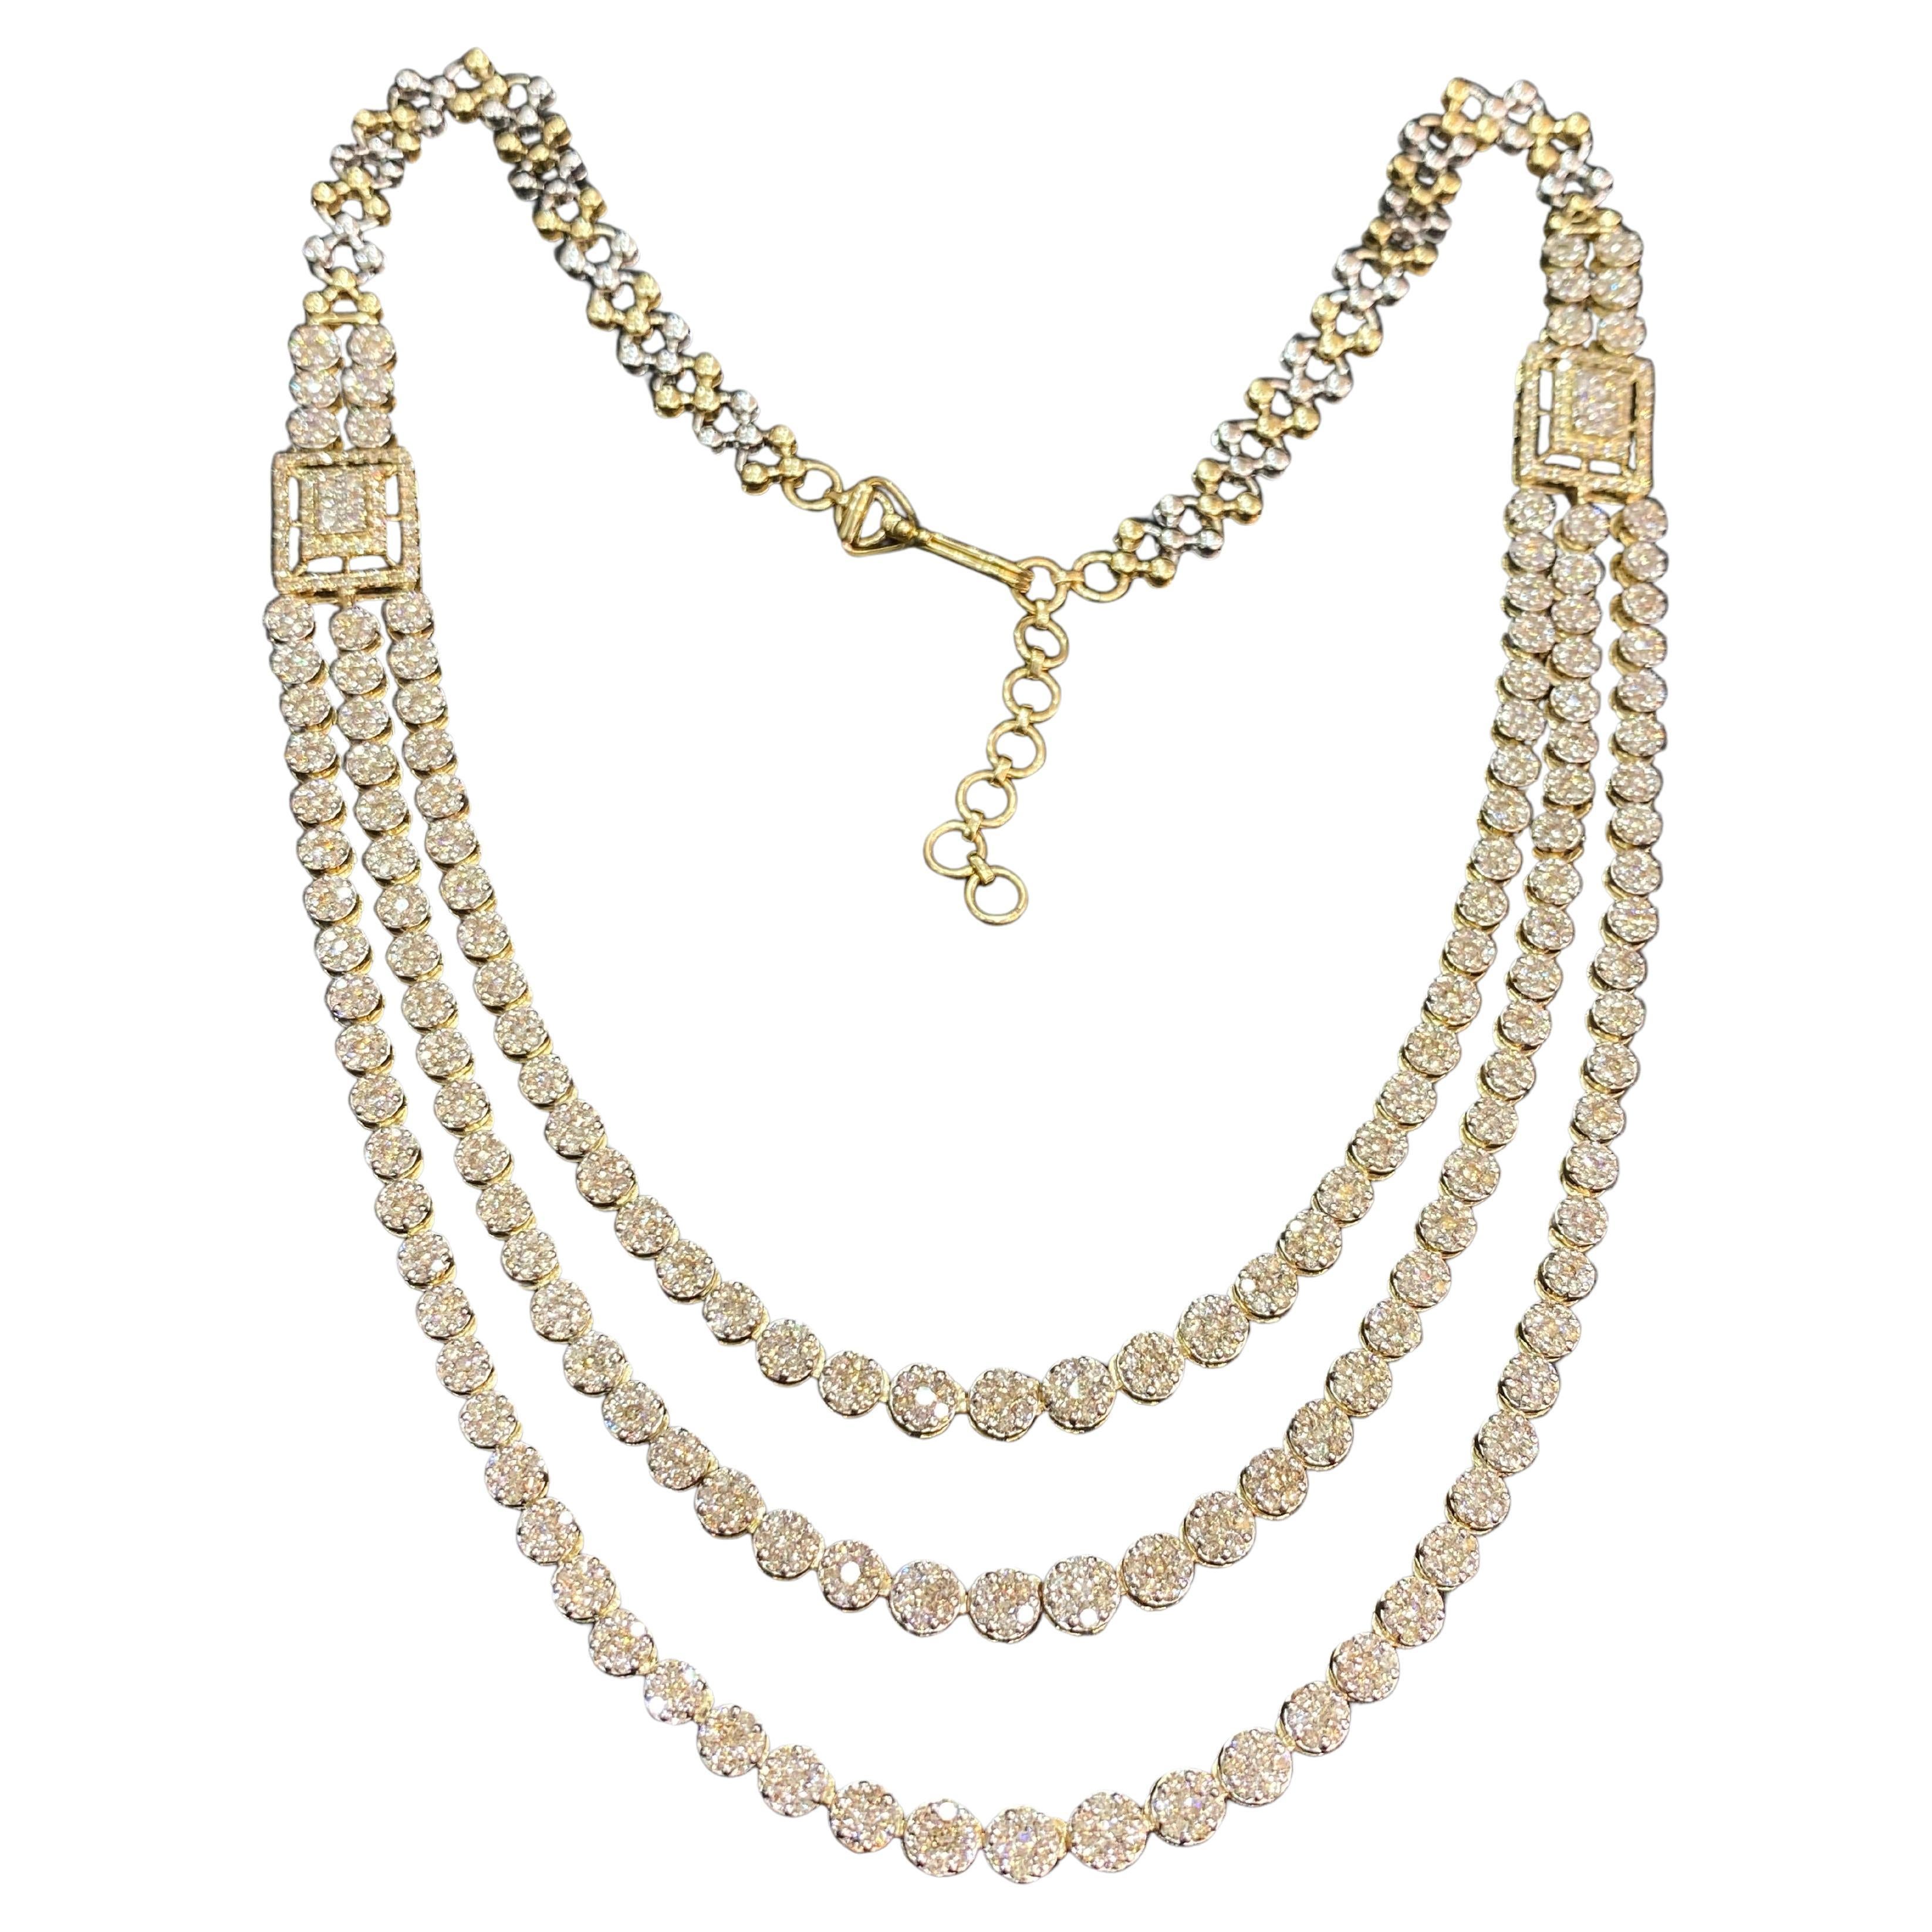 8.43 Cts F/VS1 Round Brilliant Diamonds 3-Strand Tennis Necklace 14K Yellow Gold For Sale